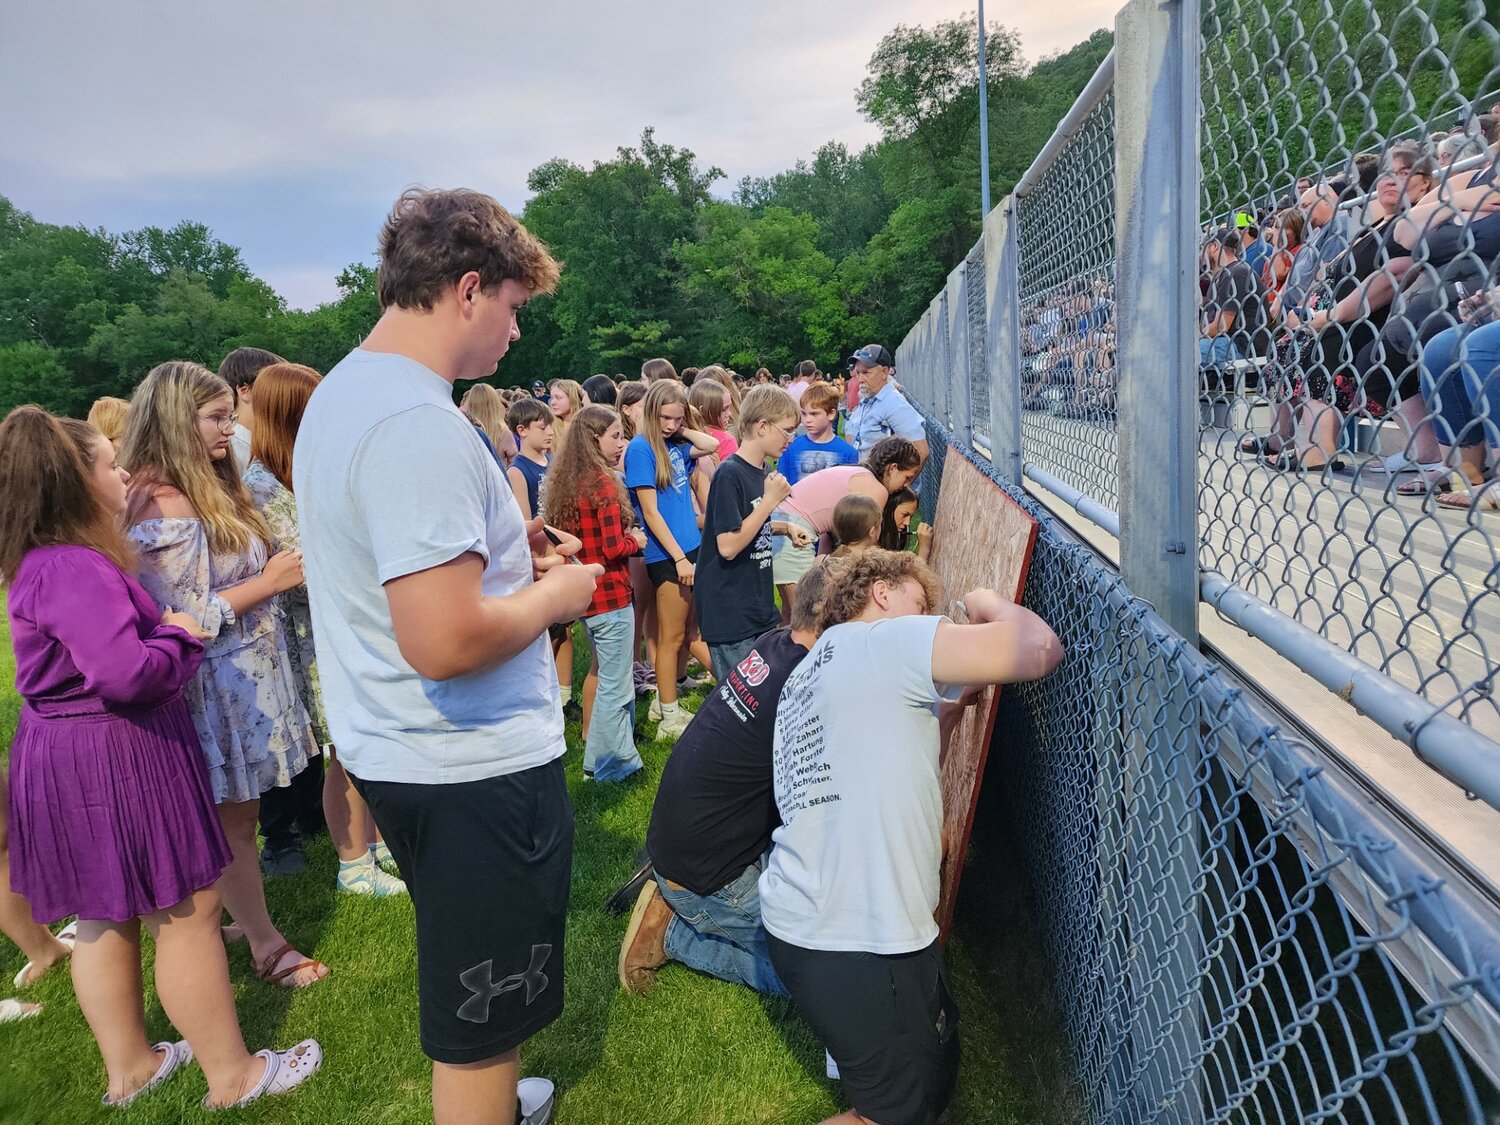 Community members signed prayer boards for the Loga and Bleskacek families on Wednesday, June 1 at a prayer vigil.